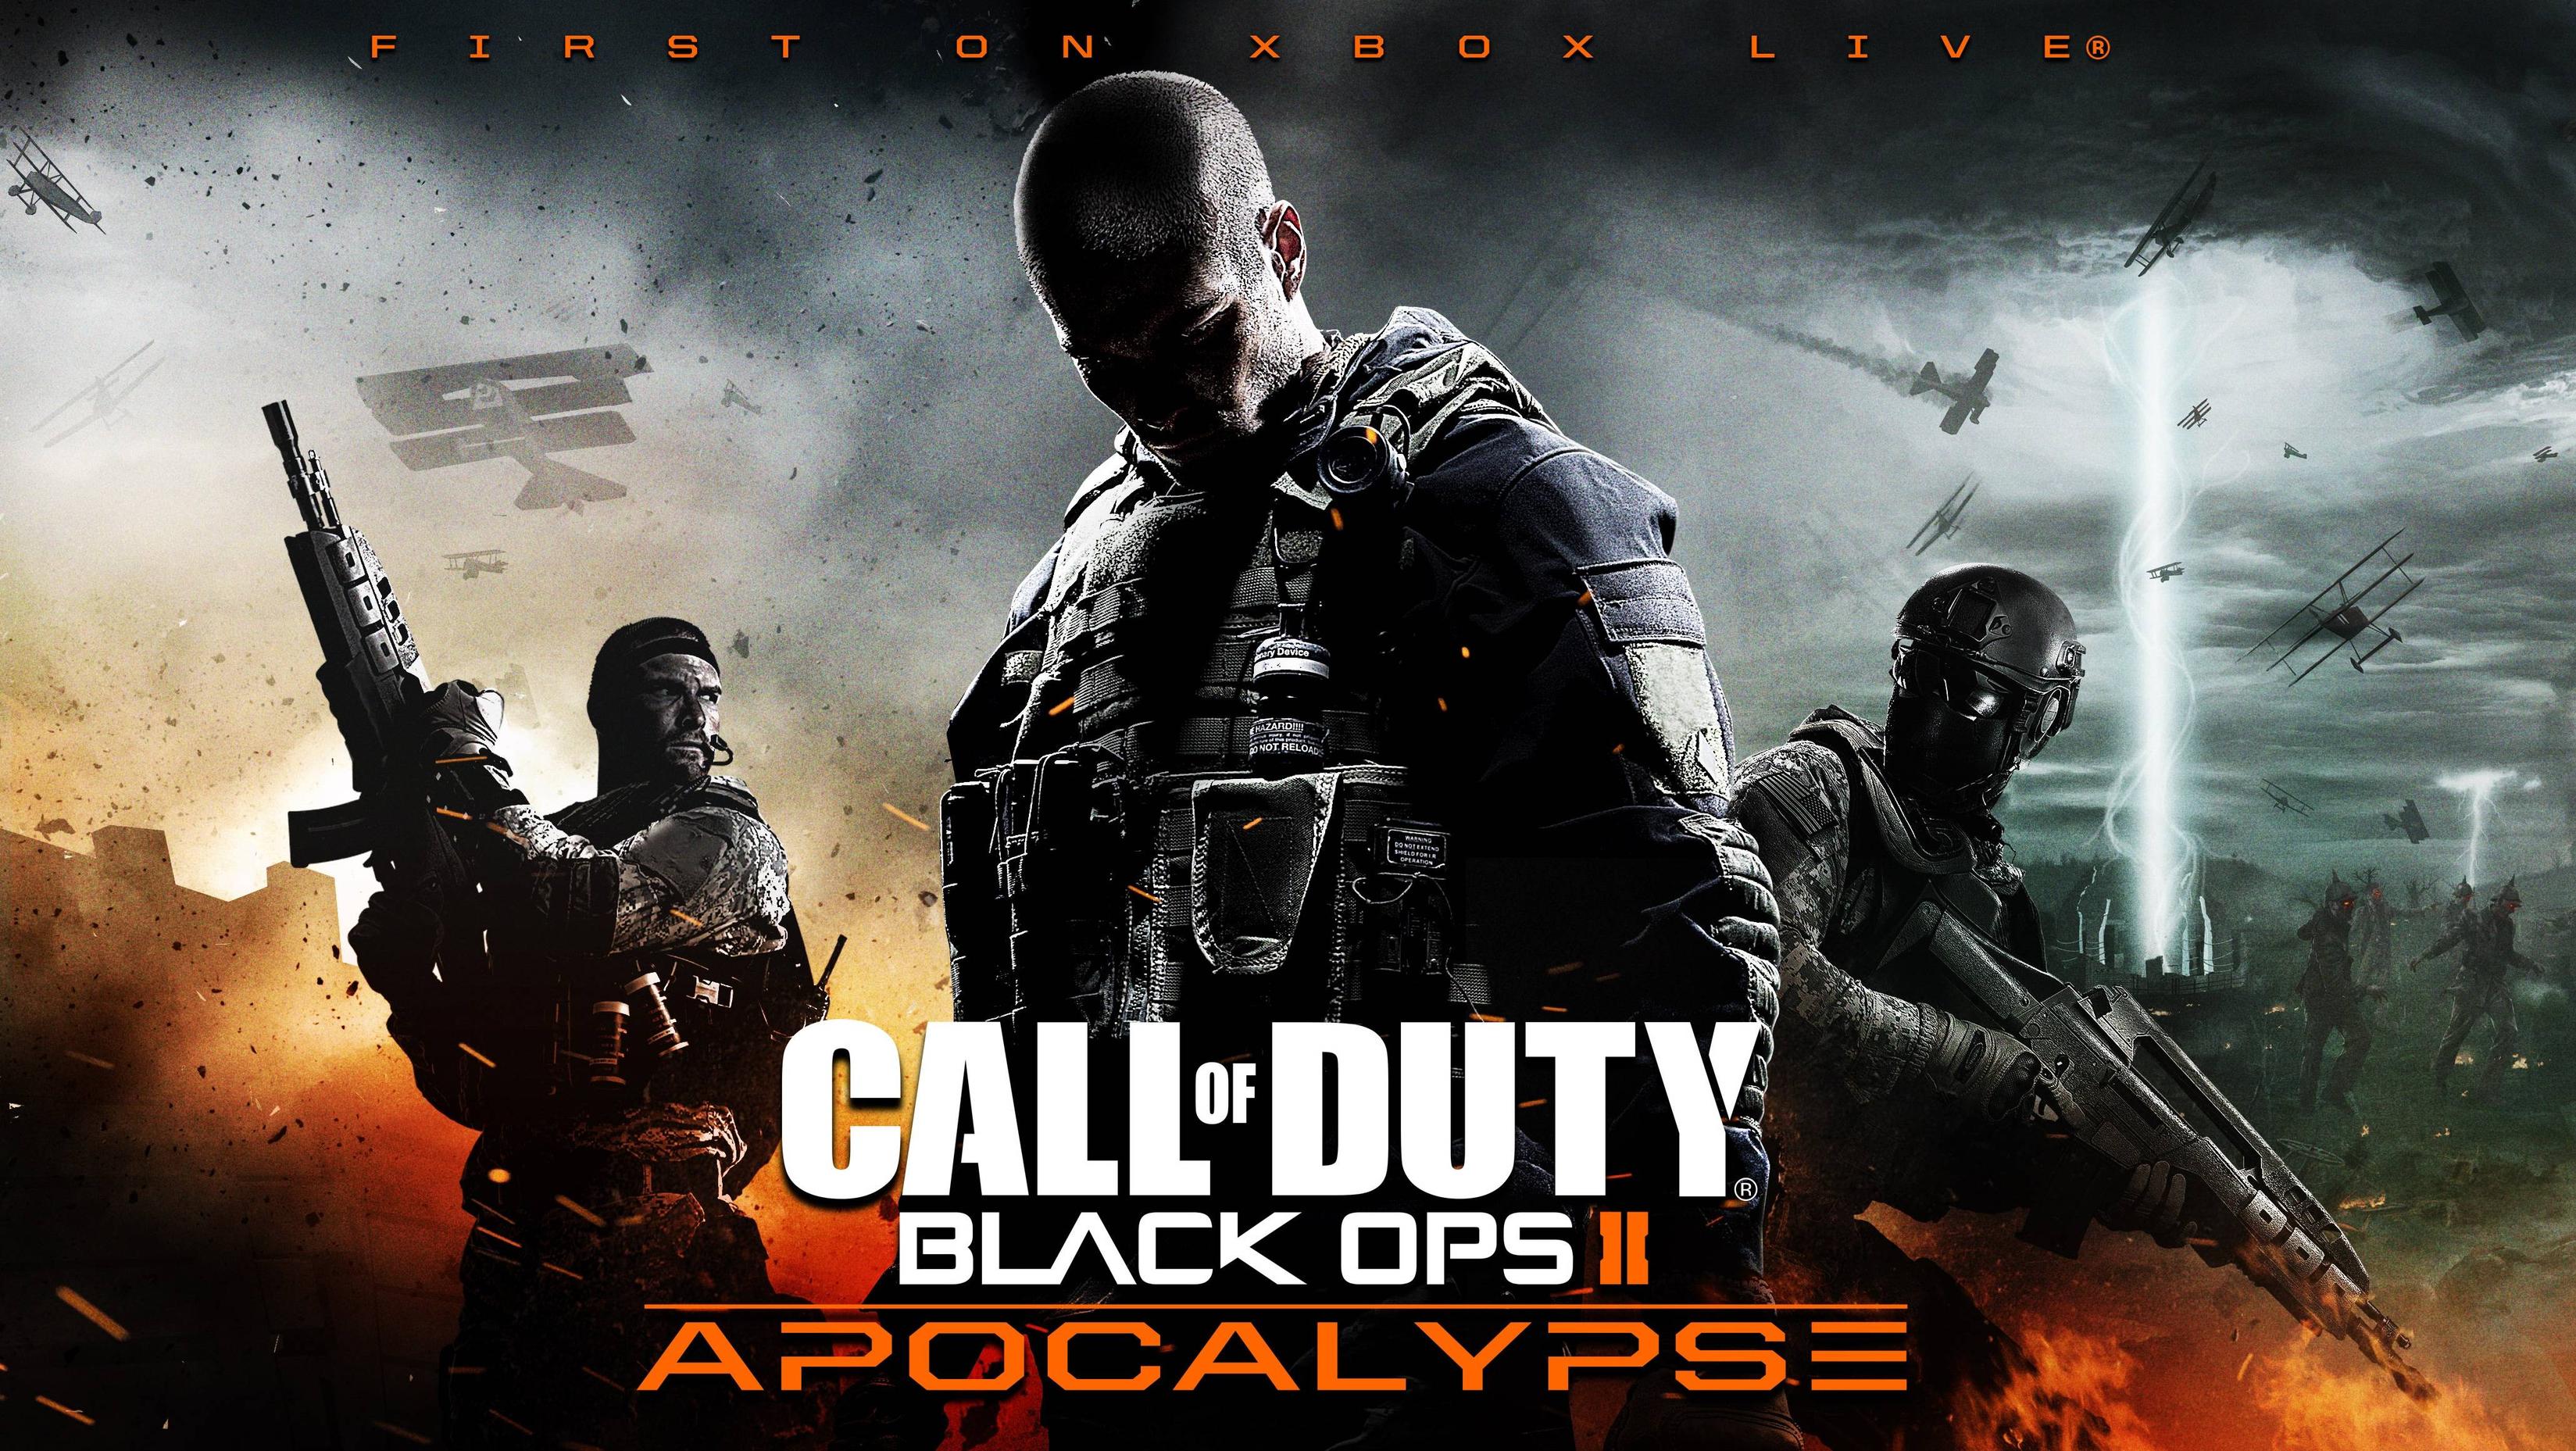 Call of Duty Black Ops 2 HD Wallpapers - BACKGROUND WALLPAPER ...